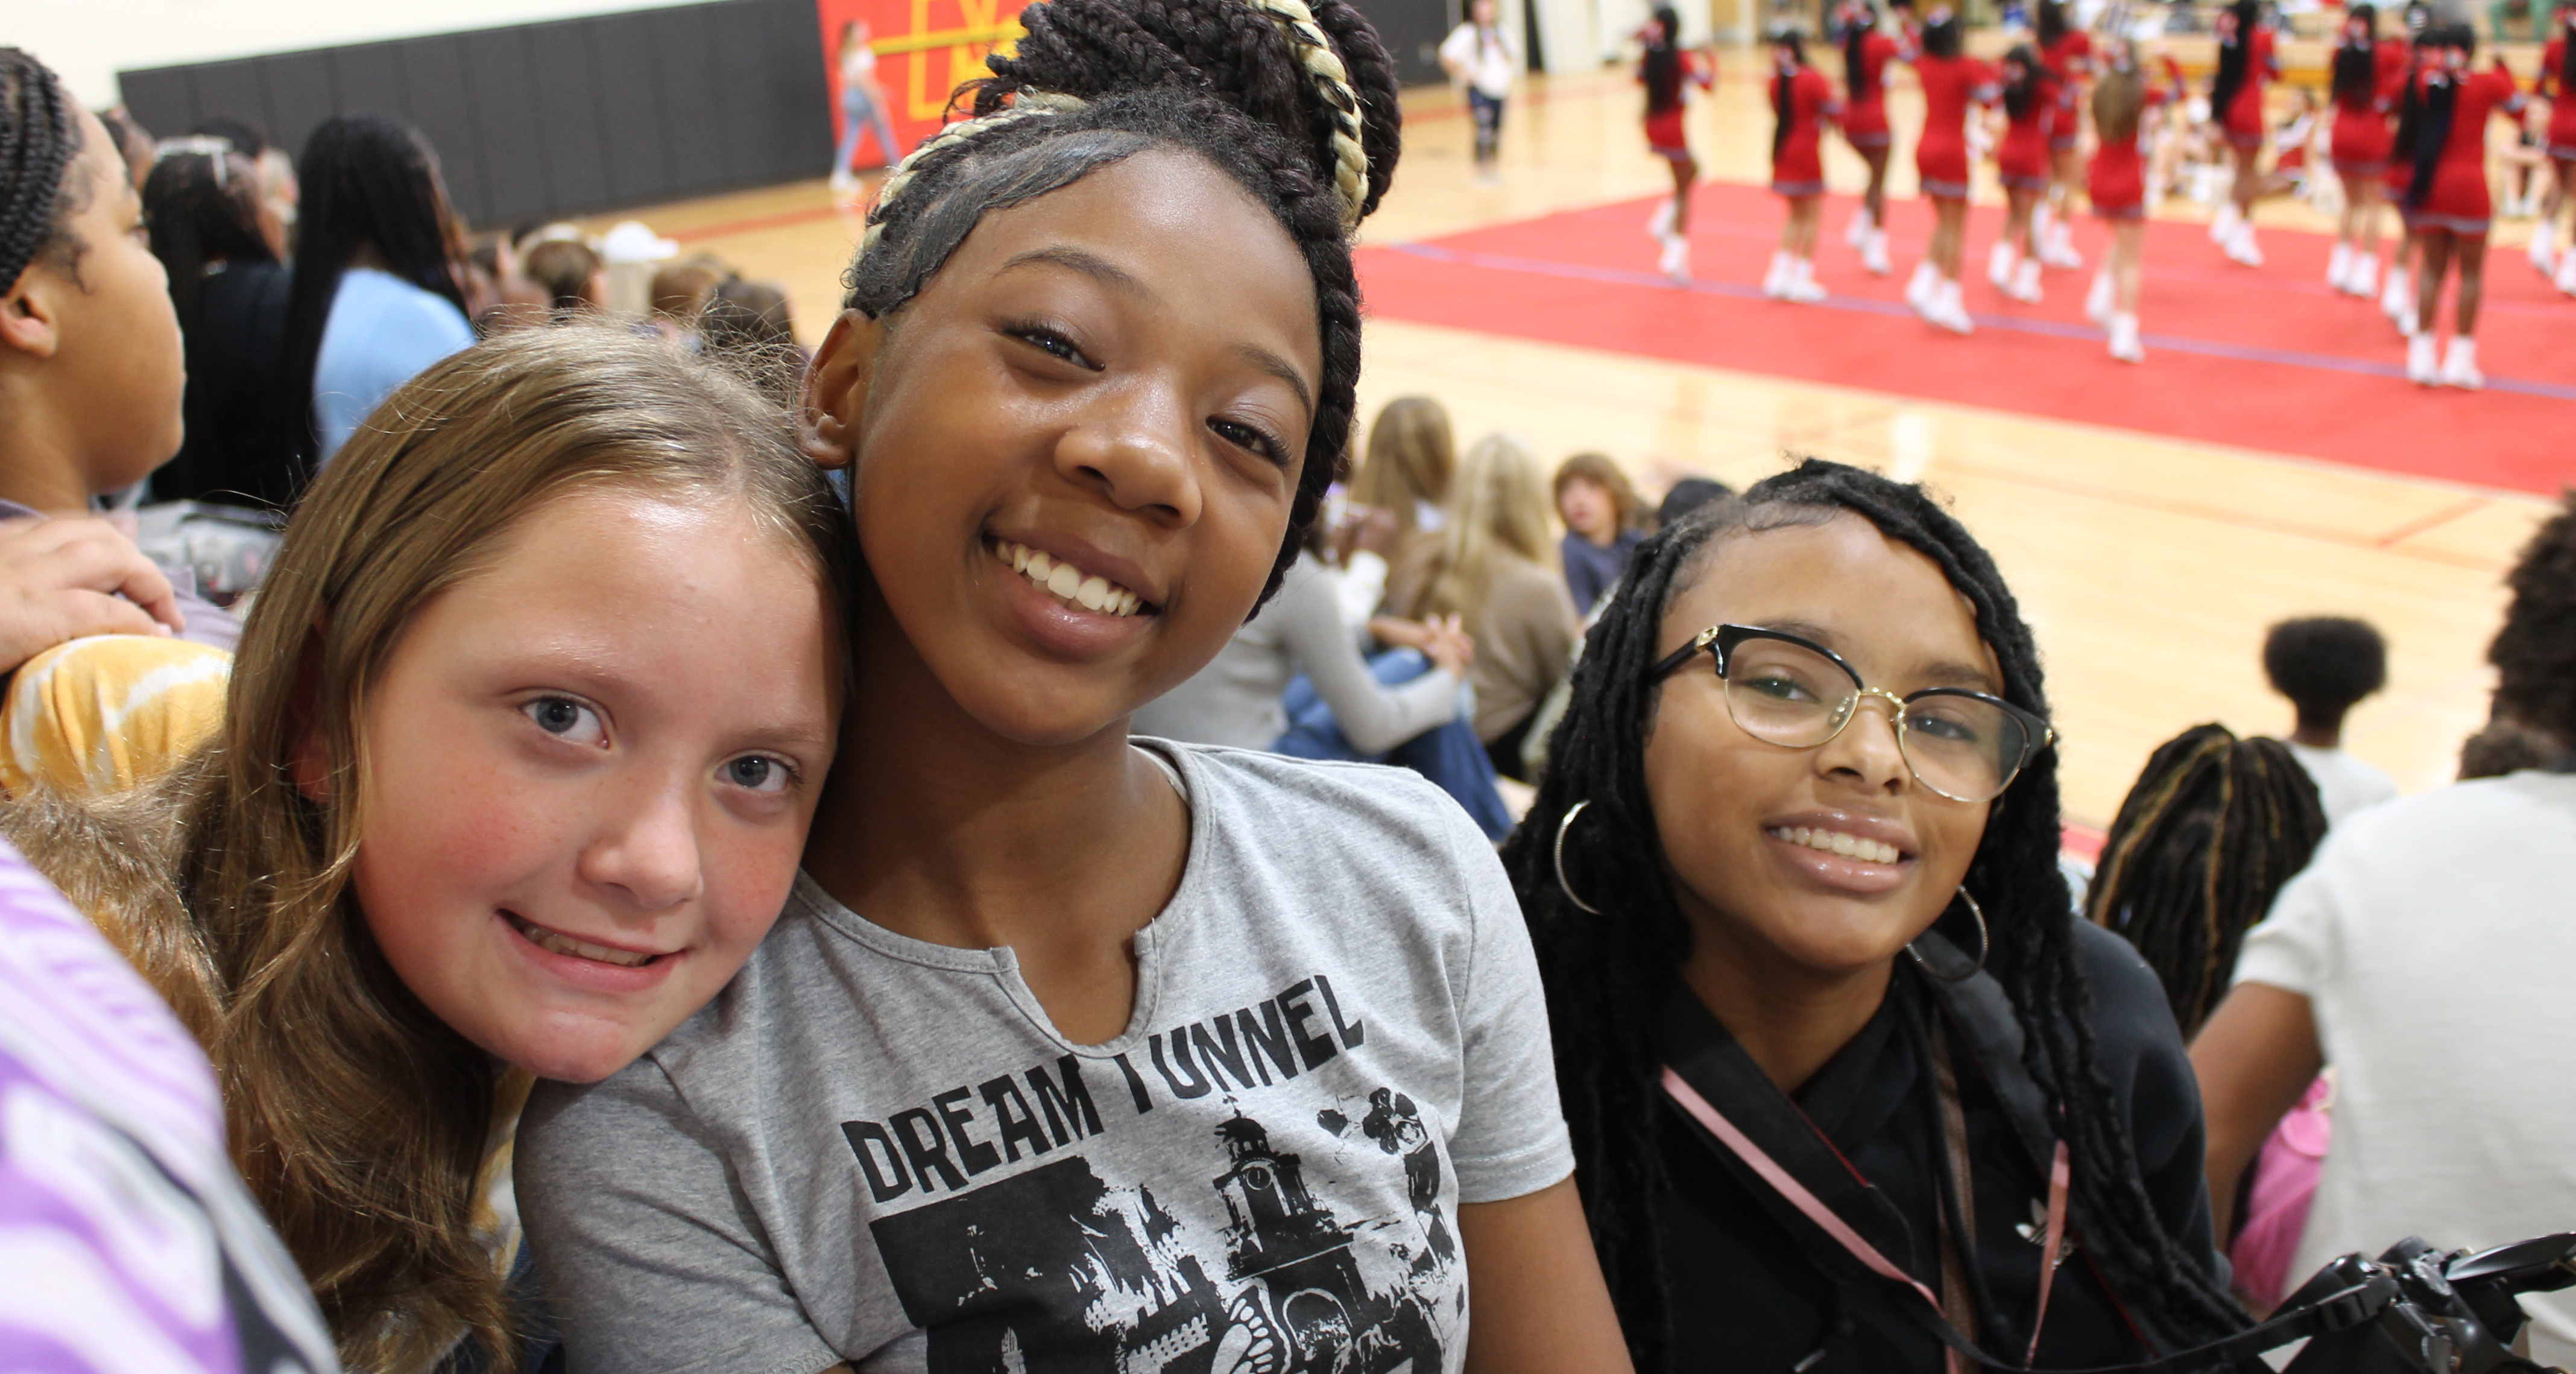 Three girls smiling during a pep rally